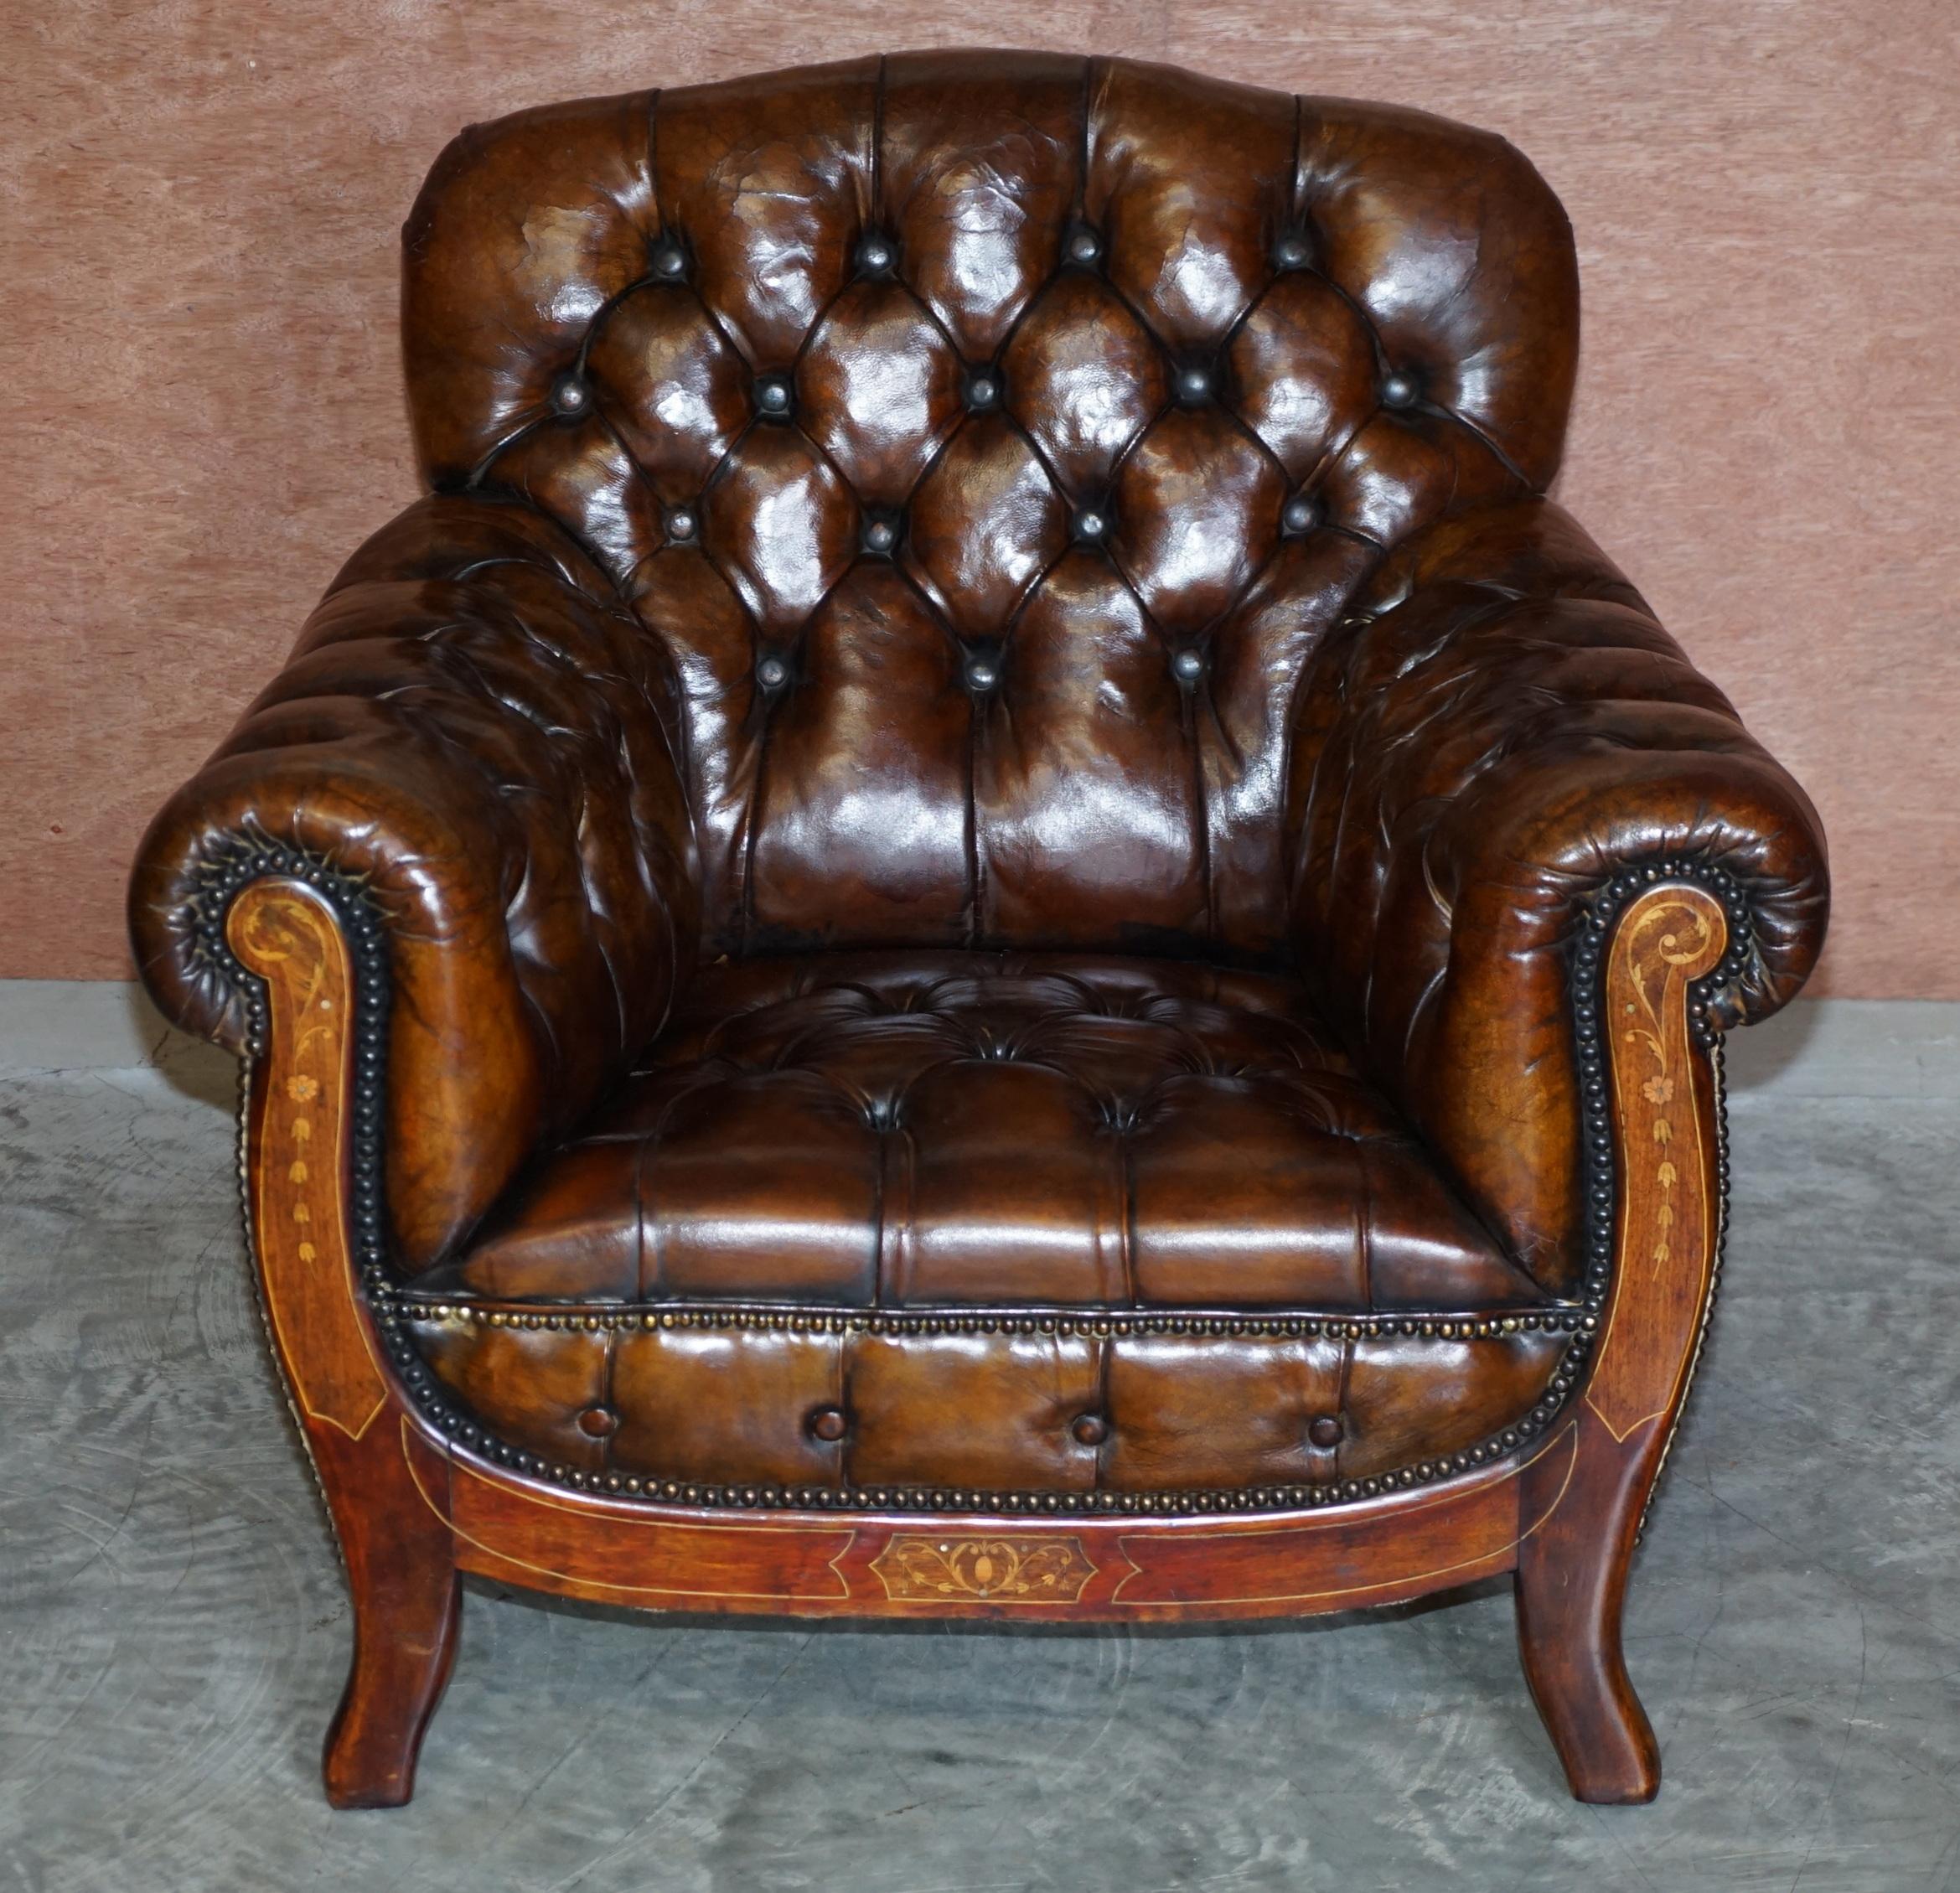 Hand-Crafted Restored Antique Art Nouveau Chesterfield Brown Leather Sofa Armchairs Suite